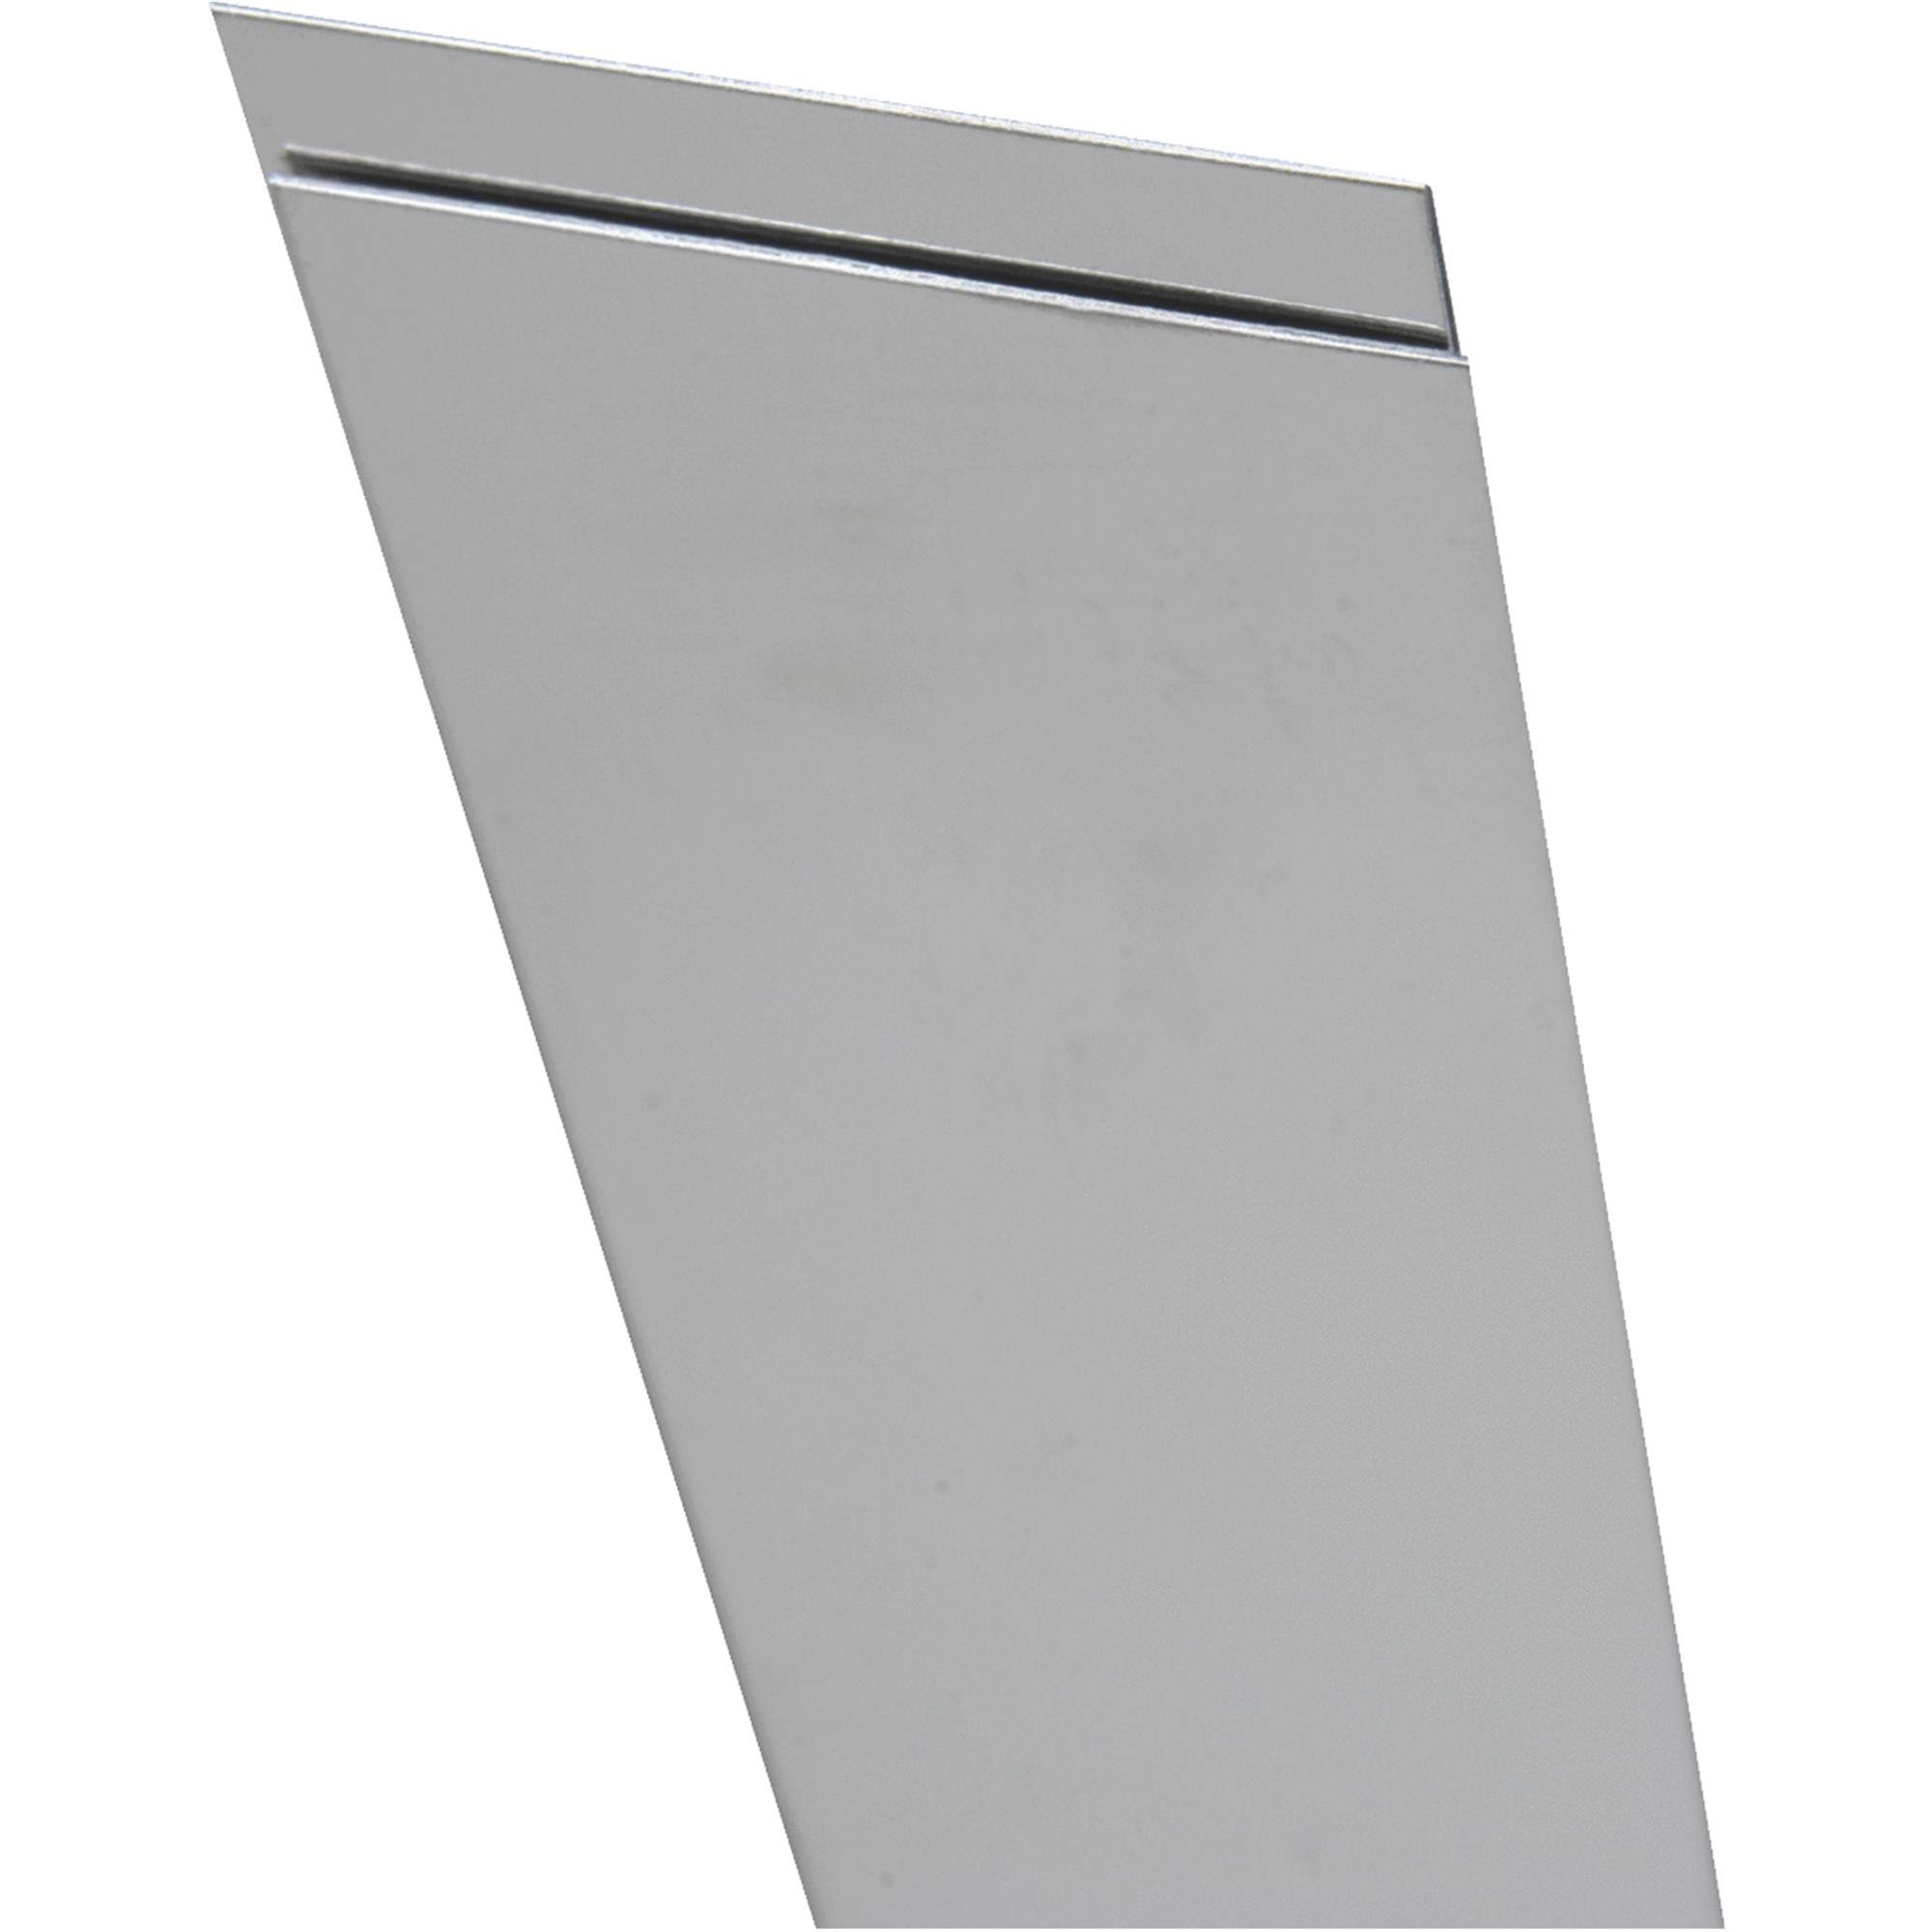 K&s Engineering Stainless Steel Sheet Metal - 0.018 inch thick